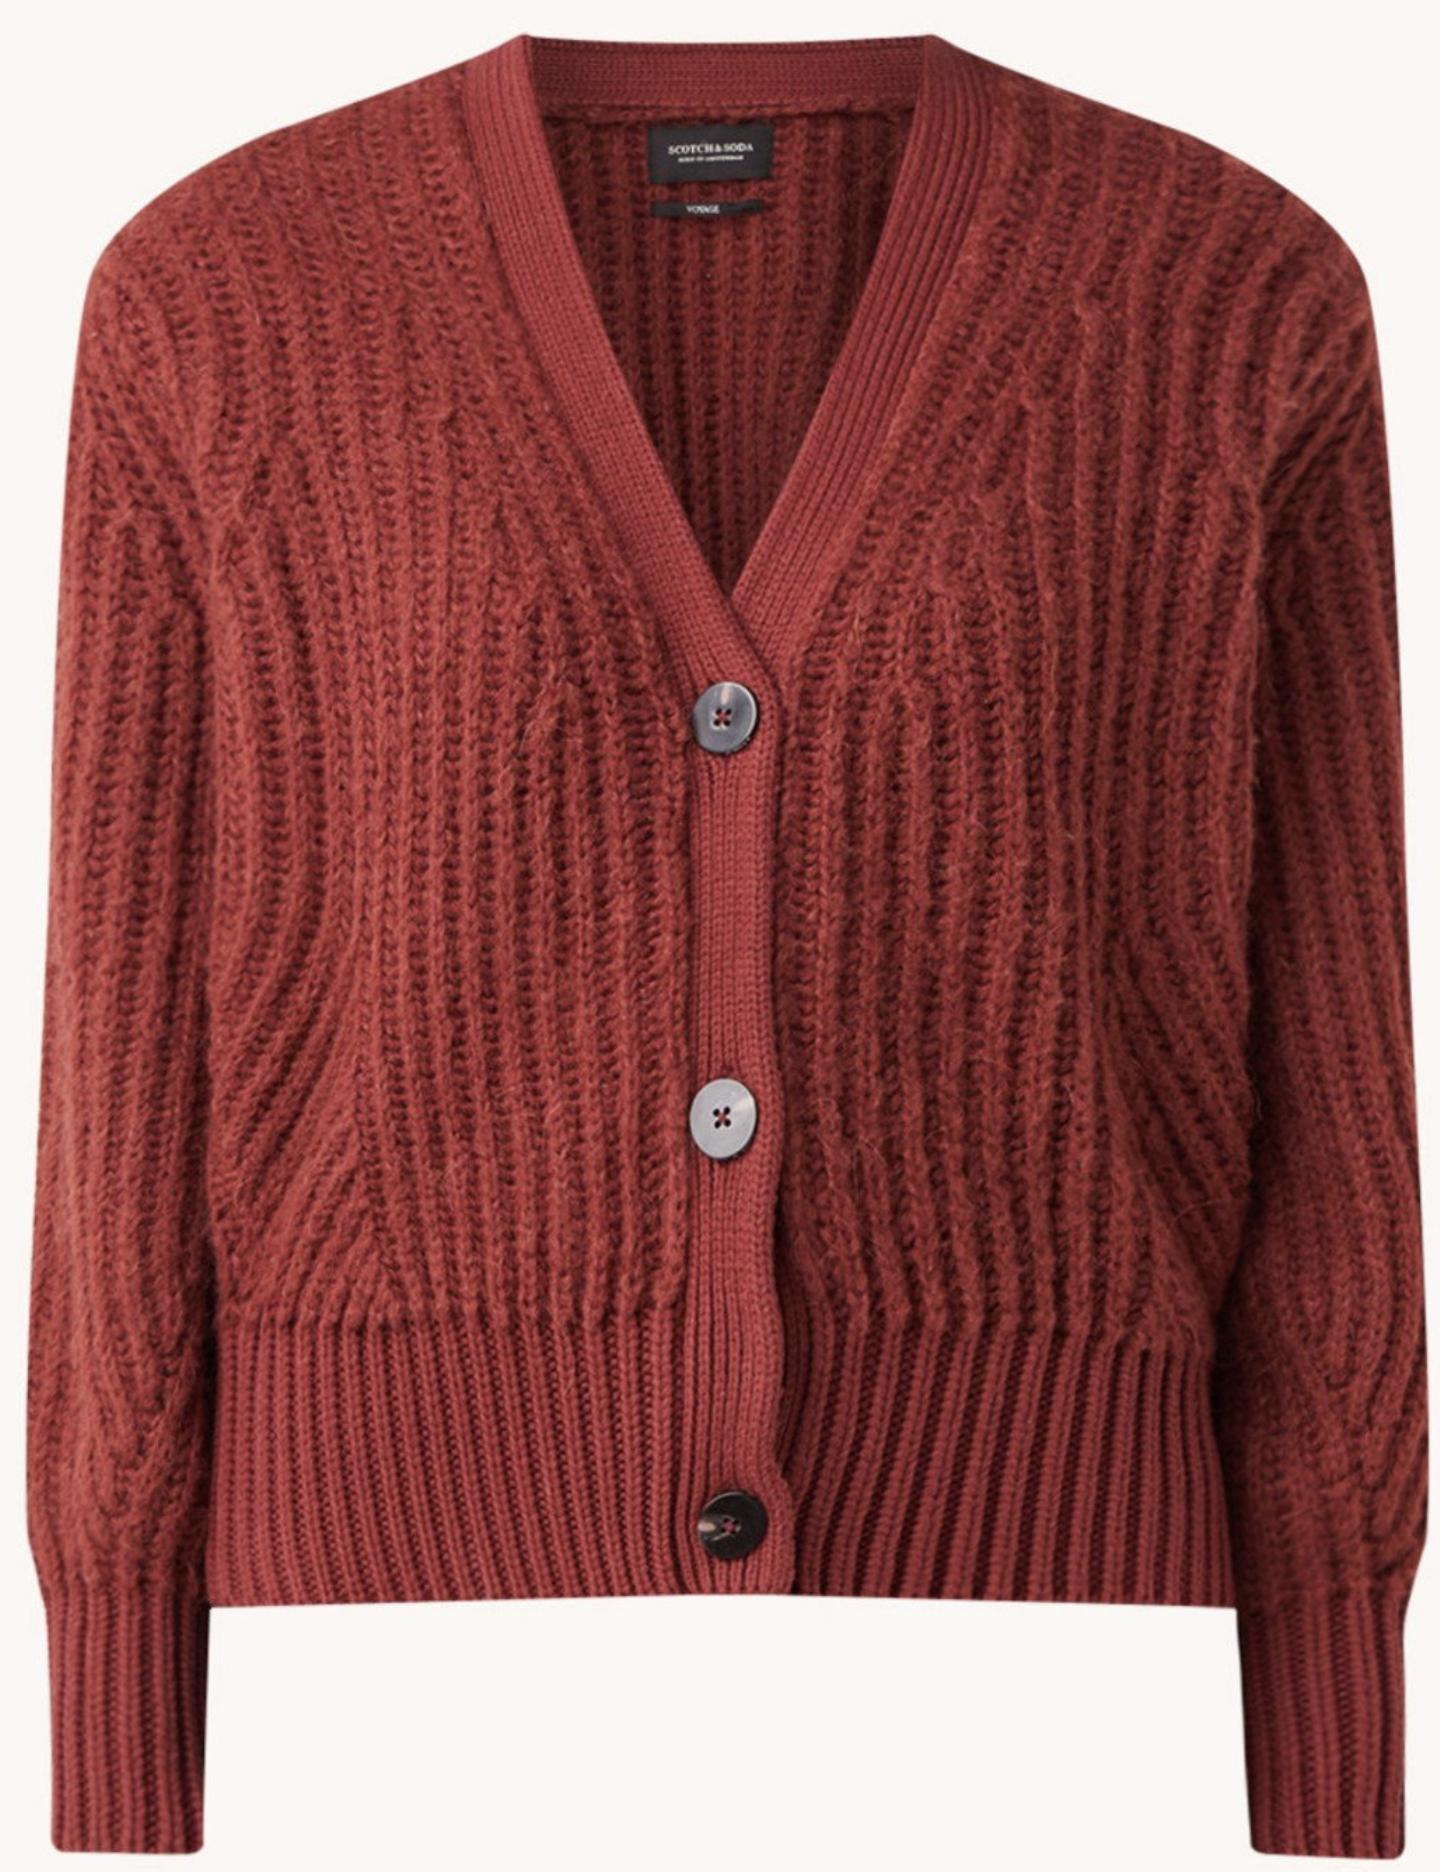 11 x the best sweaters and cardigans from the sale 